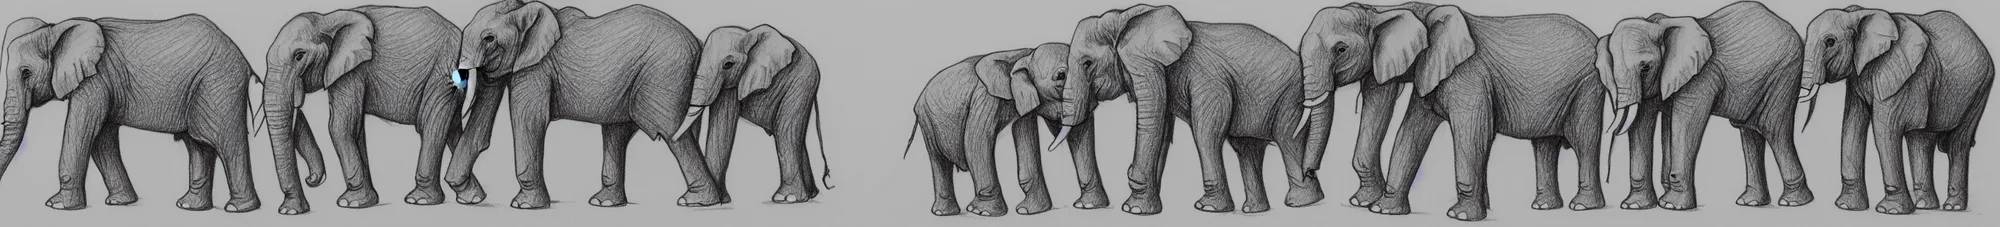 Prompt: a drawing of a single file line of elephants holding each other's tails touching trunks touching tails